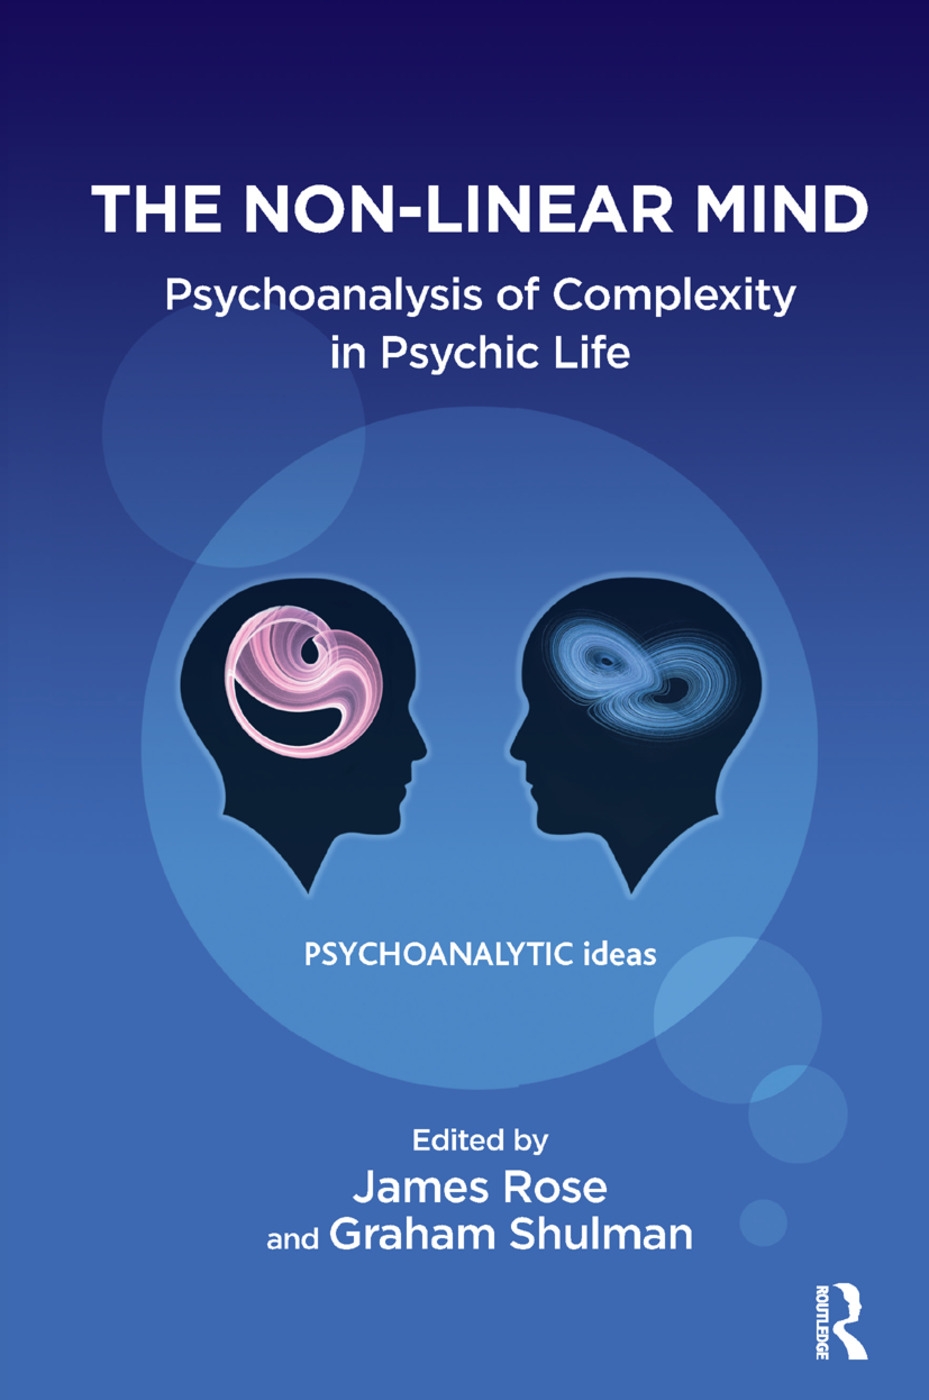 The Non-Linear Mind: Psychoanalysis of Complexity in Psychic Life